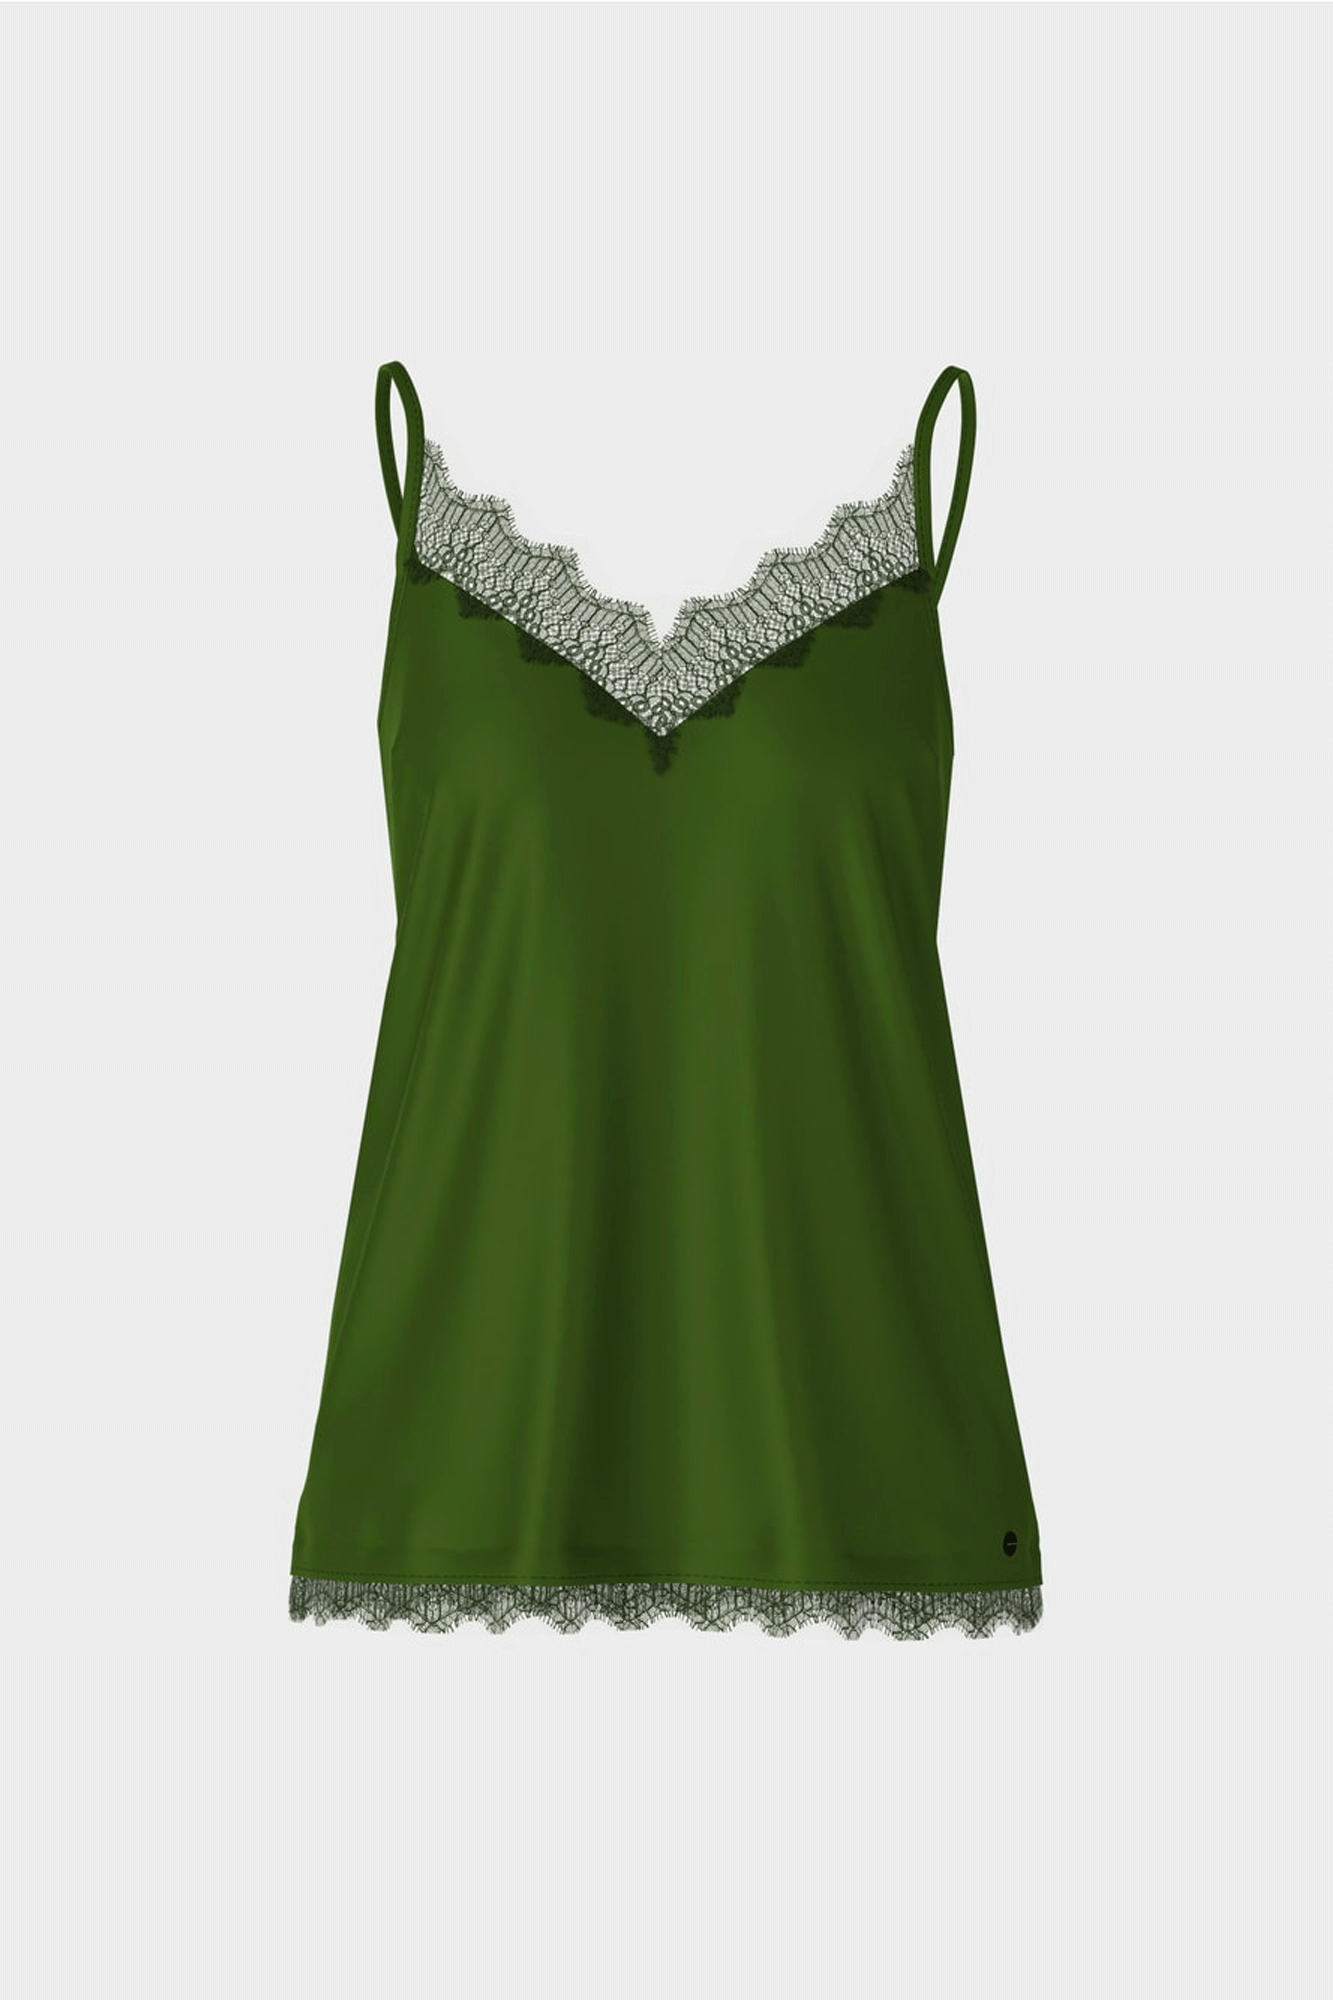 The Night Train Lace Camisole from Marc Cain is made of a soft, flowing silk material with adjustable straps and delicate lace trims along the neckline and hem. Its bust darts provide a straight silhouette and ultimate comfort. An ideal evening top.